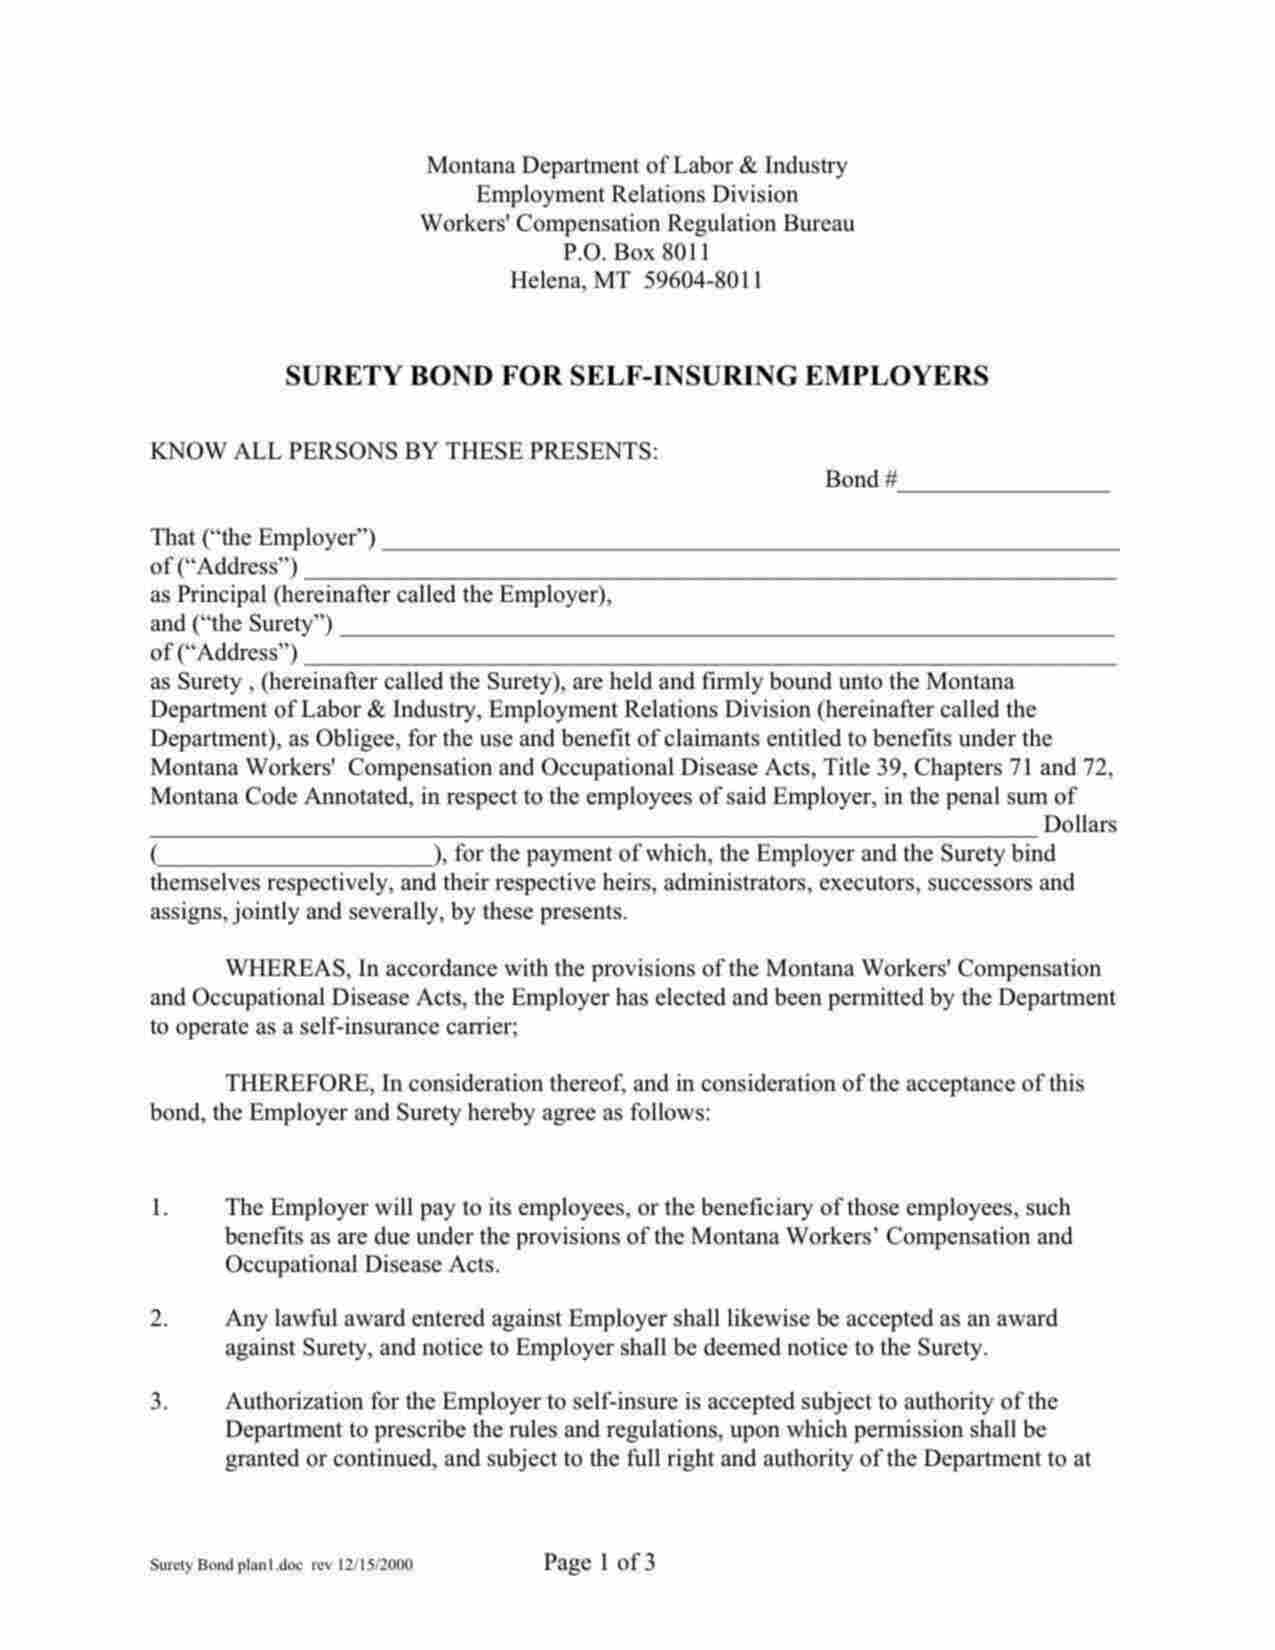 Montana Self-Insuring Employers Workers Compensation Bond Form